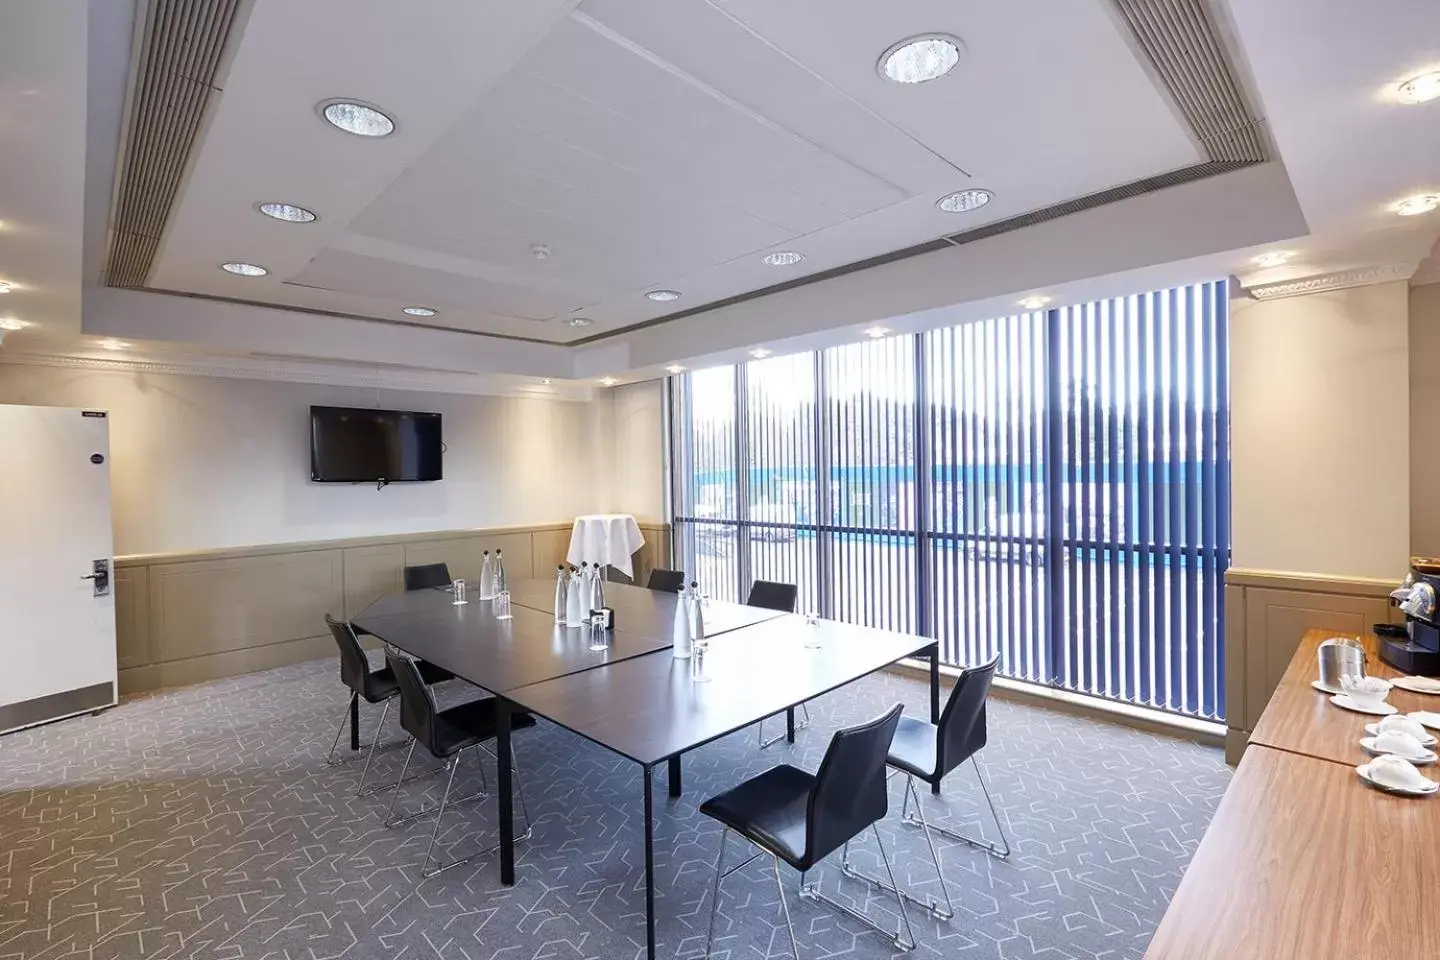 Area and facilities in Millennium & Copthorne Hotels at Chelsea Football Club